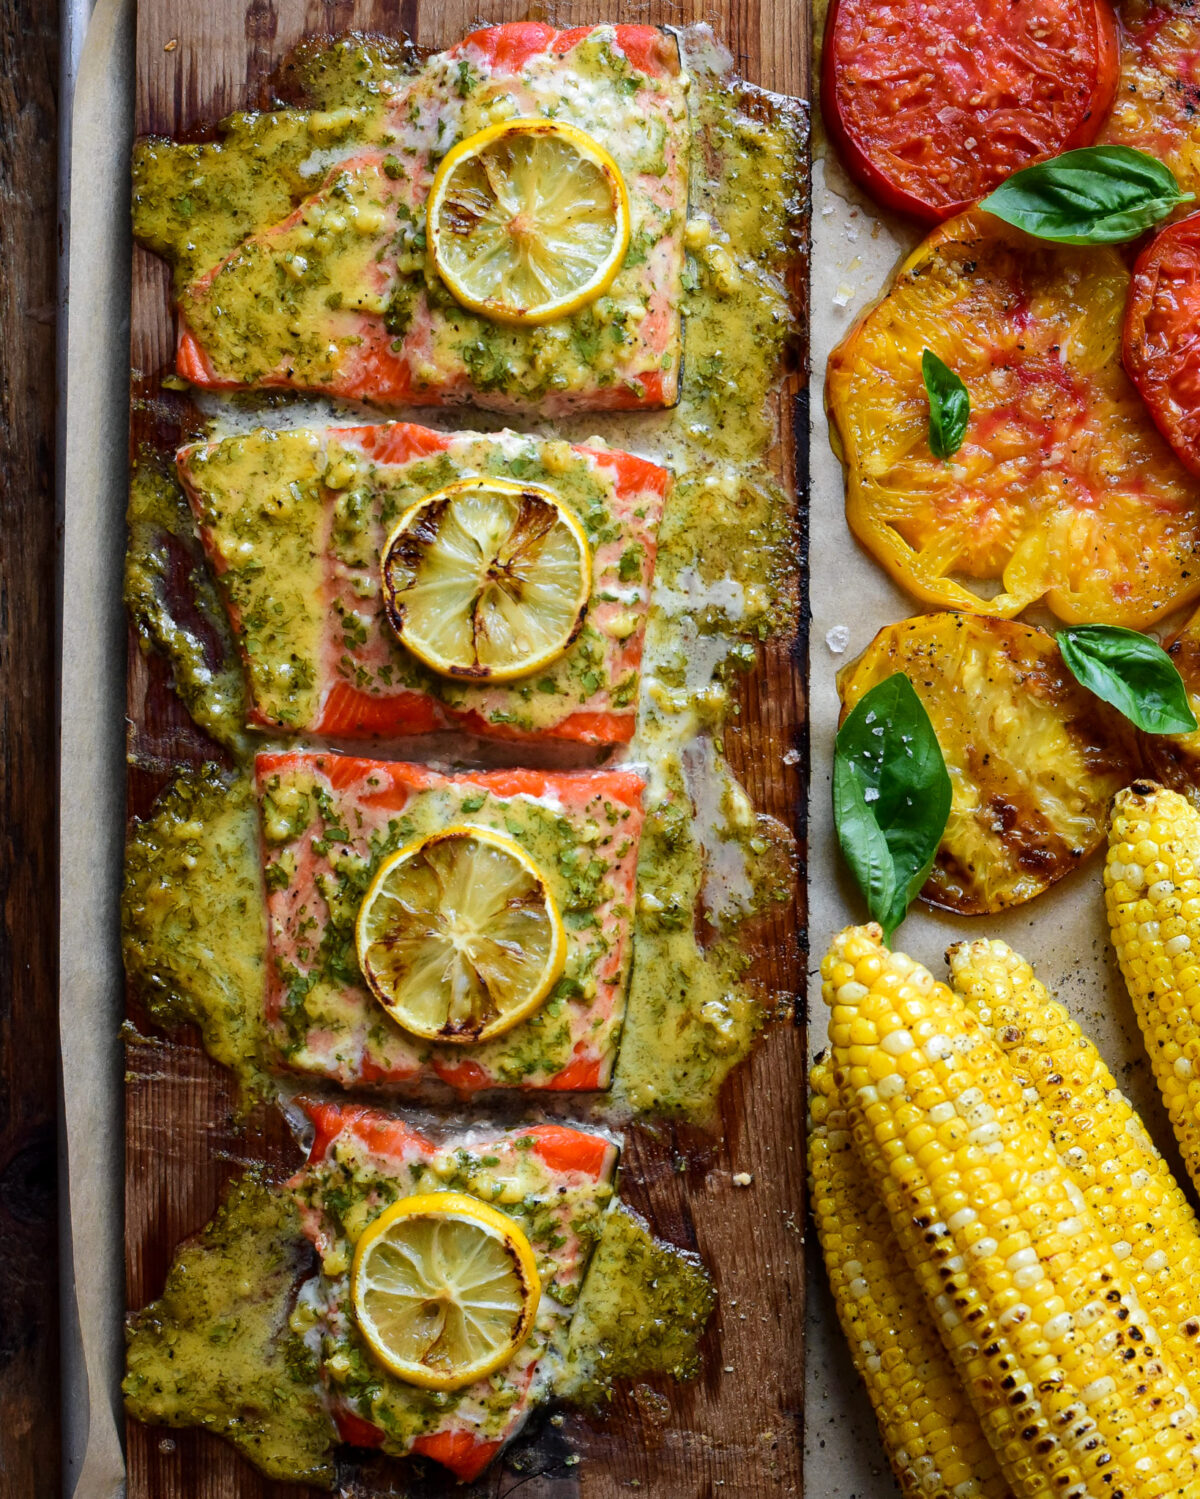 Cedar Plank Sockeye Salmon portioned in four with sauce and lemon slices. Served with grilled corn and tomatoes.